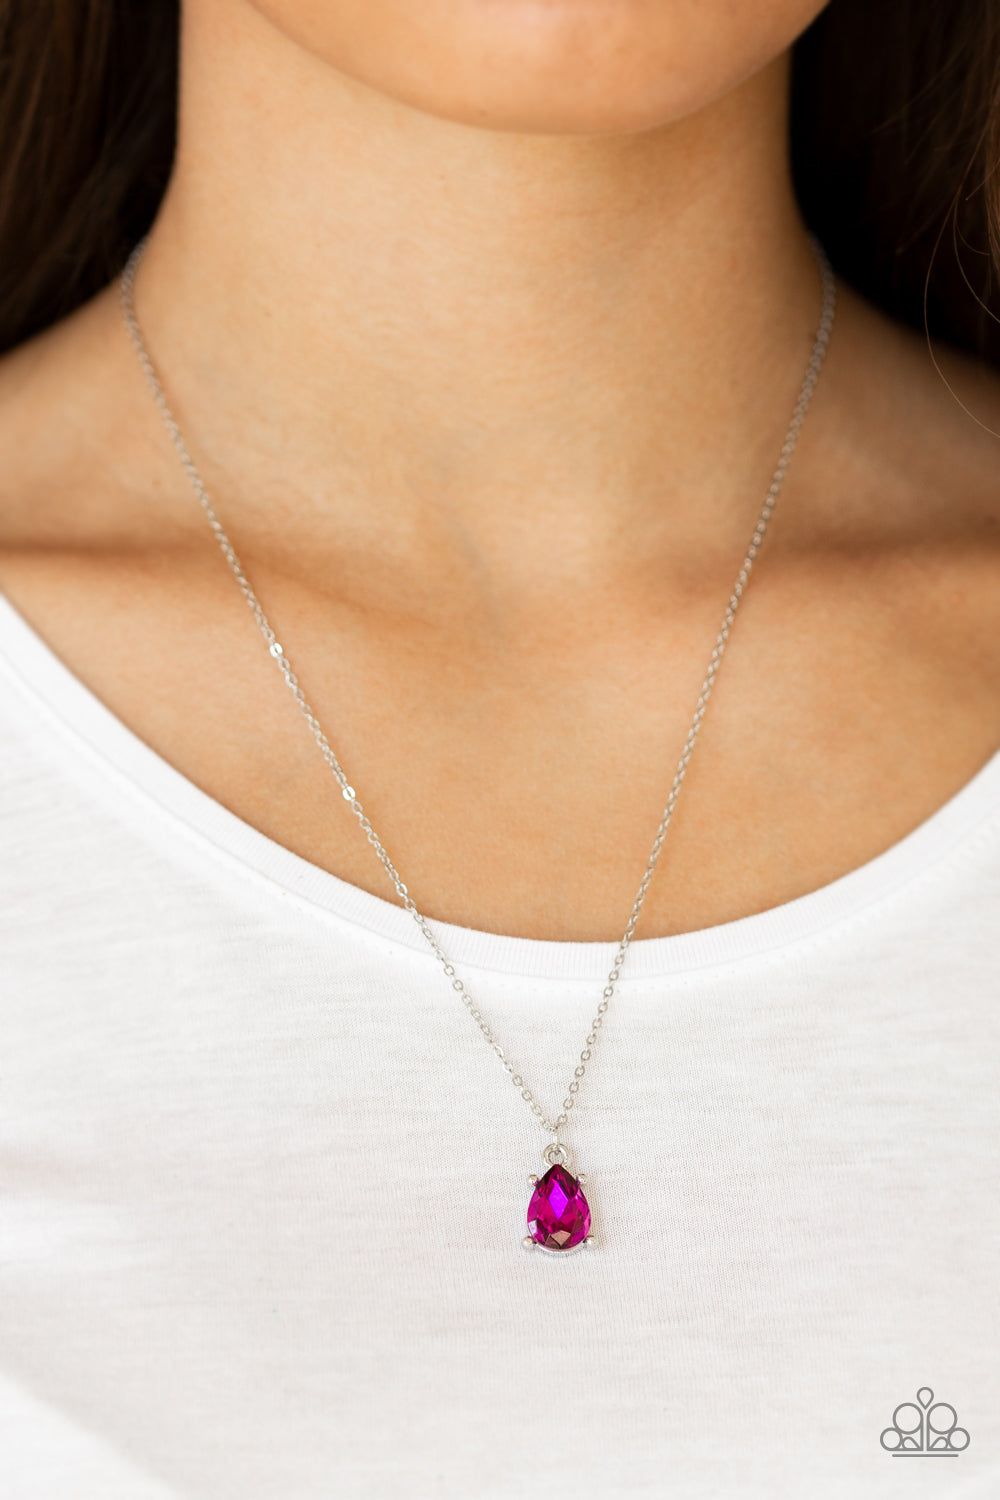 Paparazzi Necklace ~ Classy Classicist - Pink Dainty Necklace